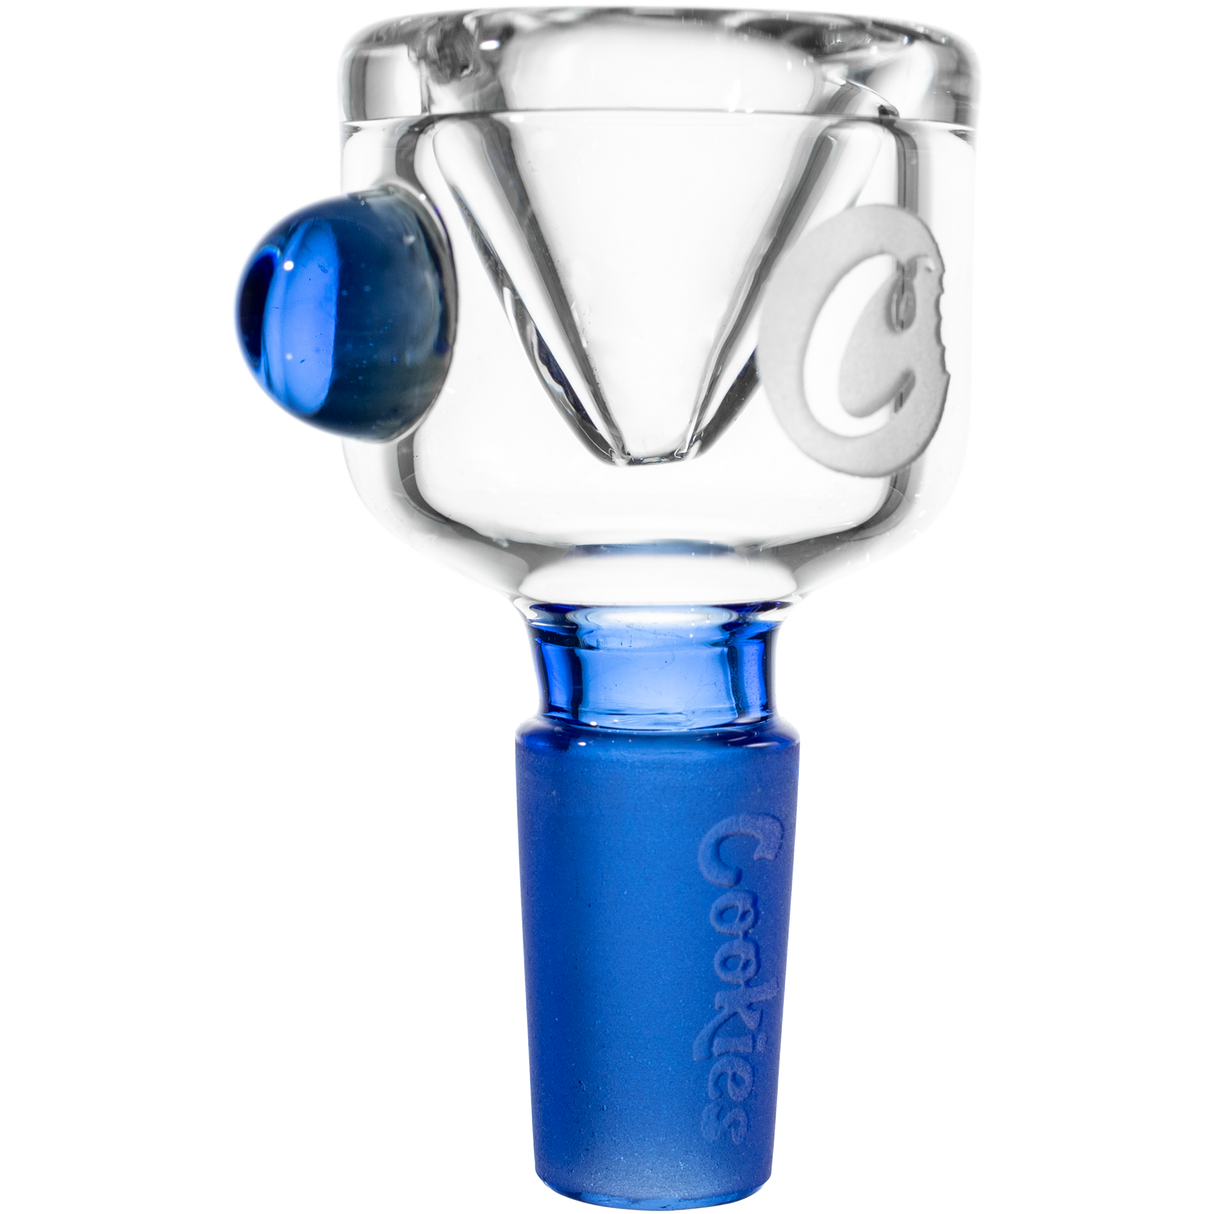 Cookies Classic Bong Bowl in blue, made from borosilicate glass, 14mm joint size, front view on white background